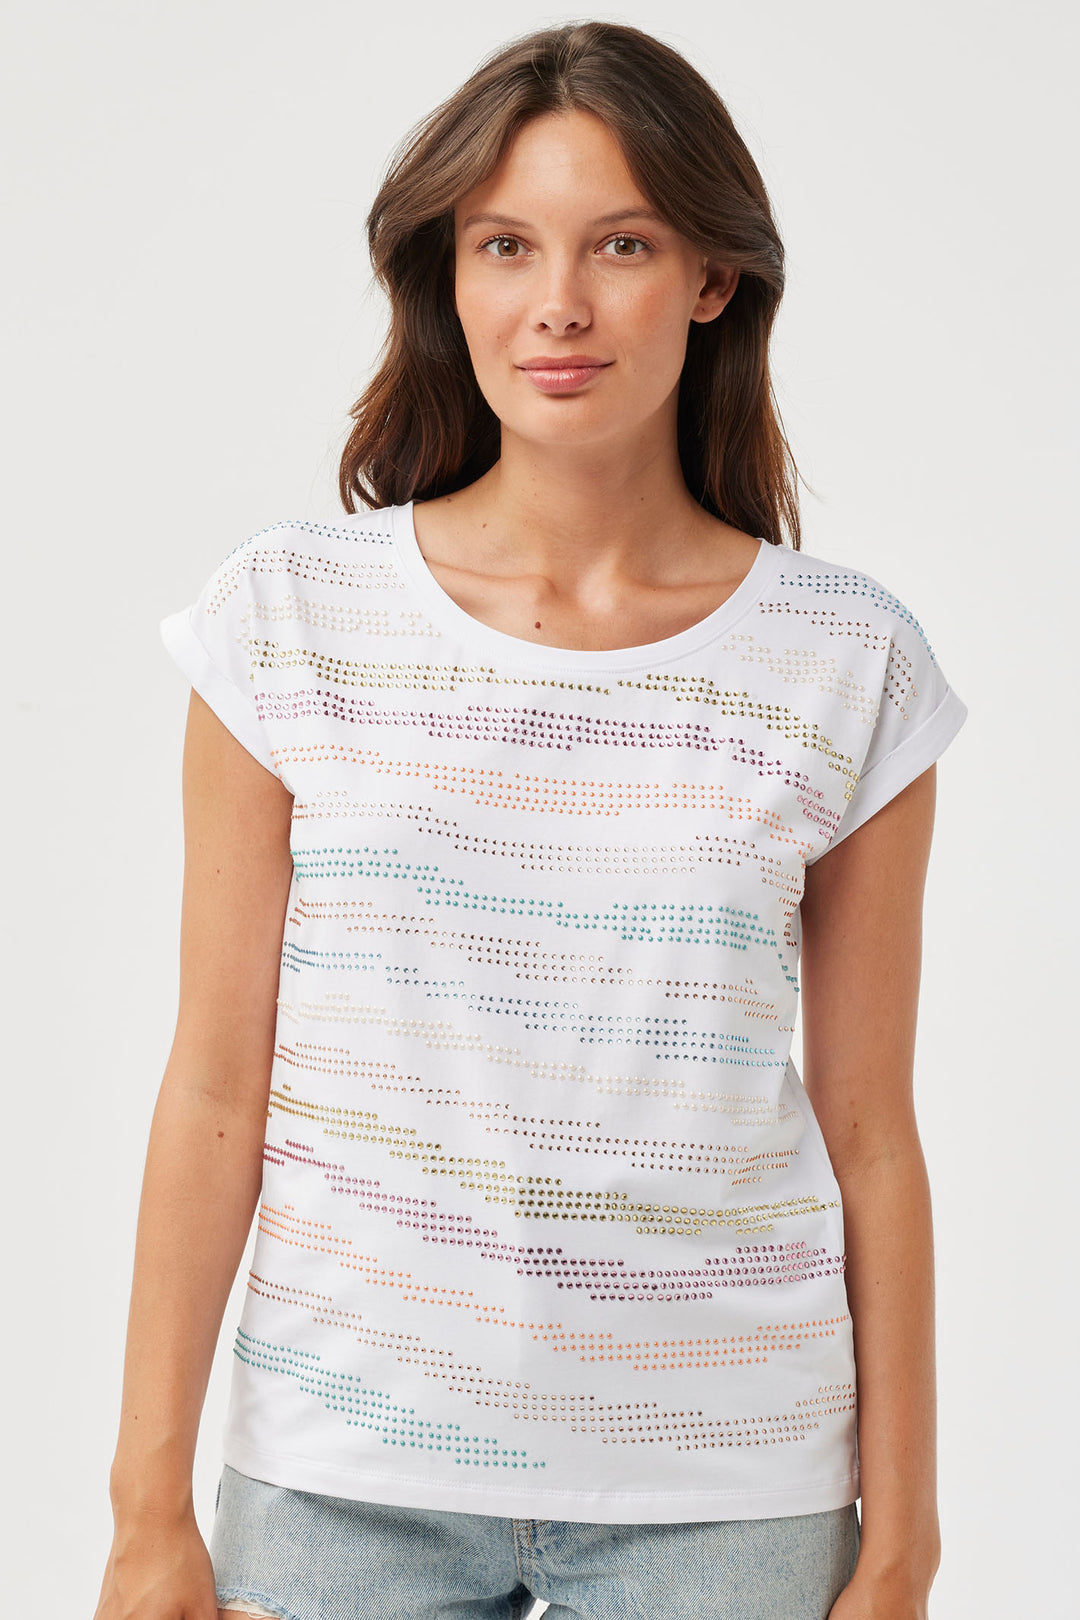 Leo & Ugo TED786 White Rainbow Crystal Wide Neck T-Shirt - Experience Boutique